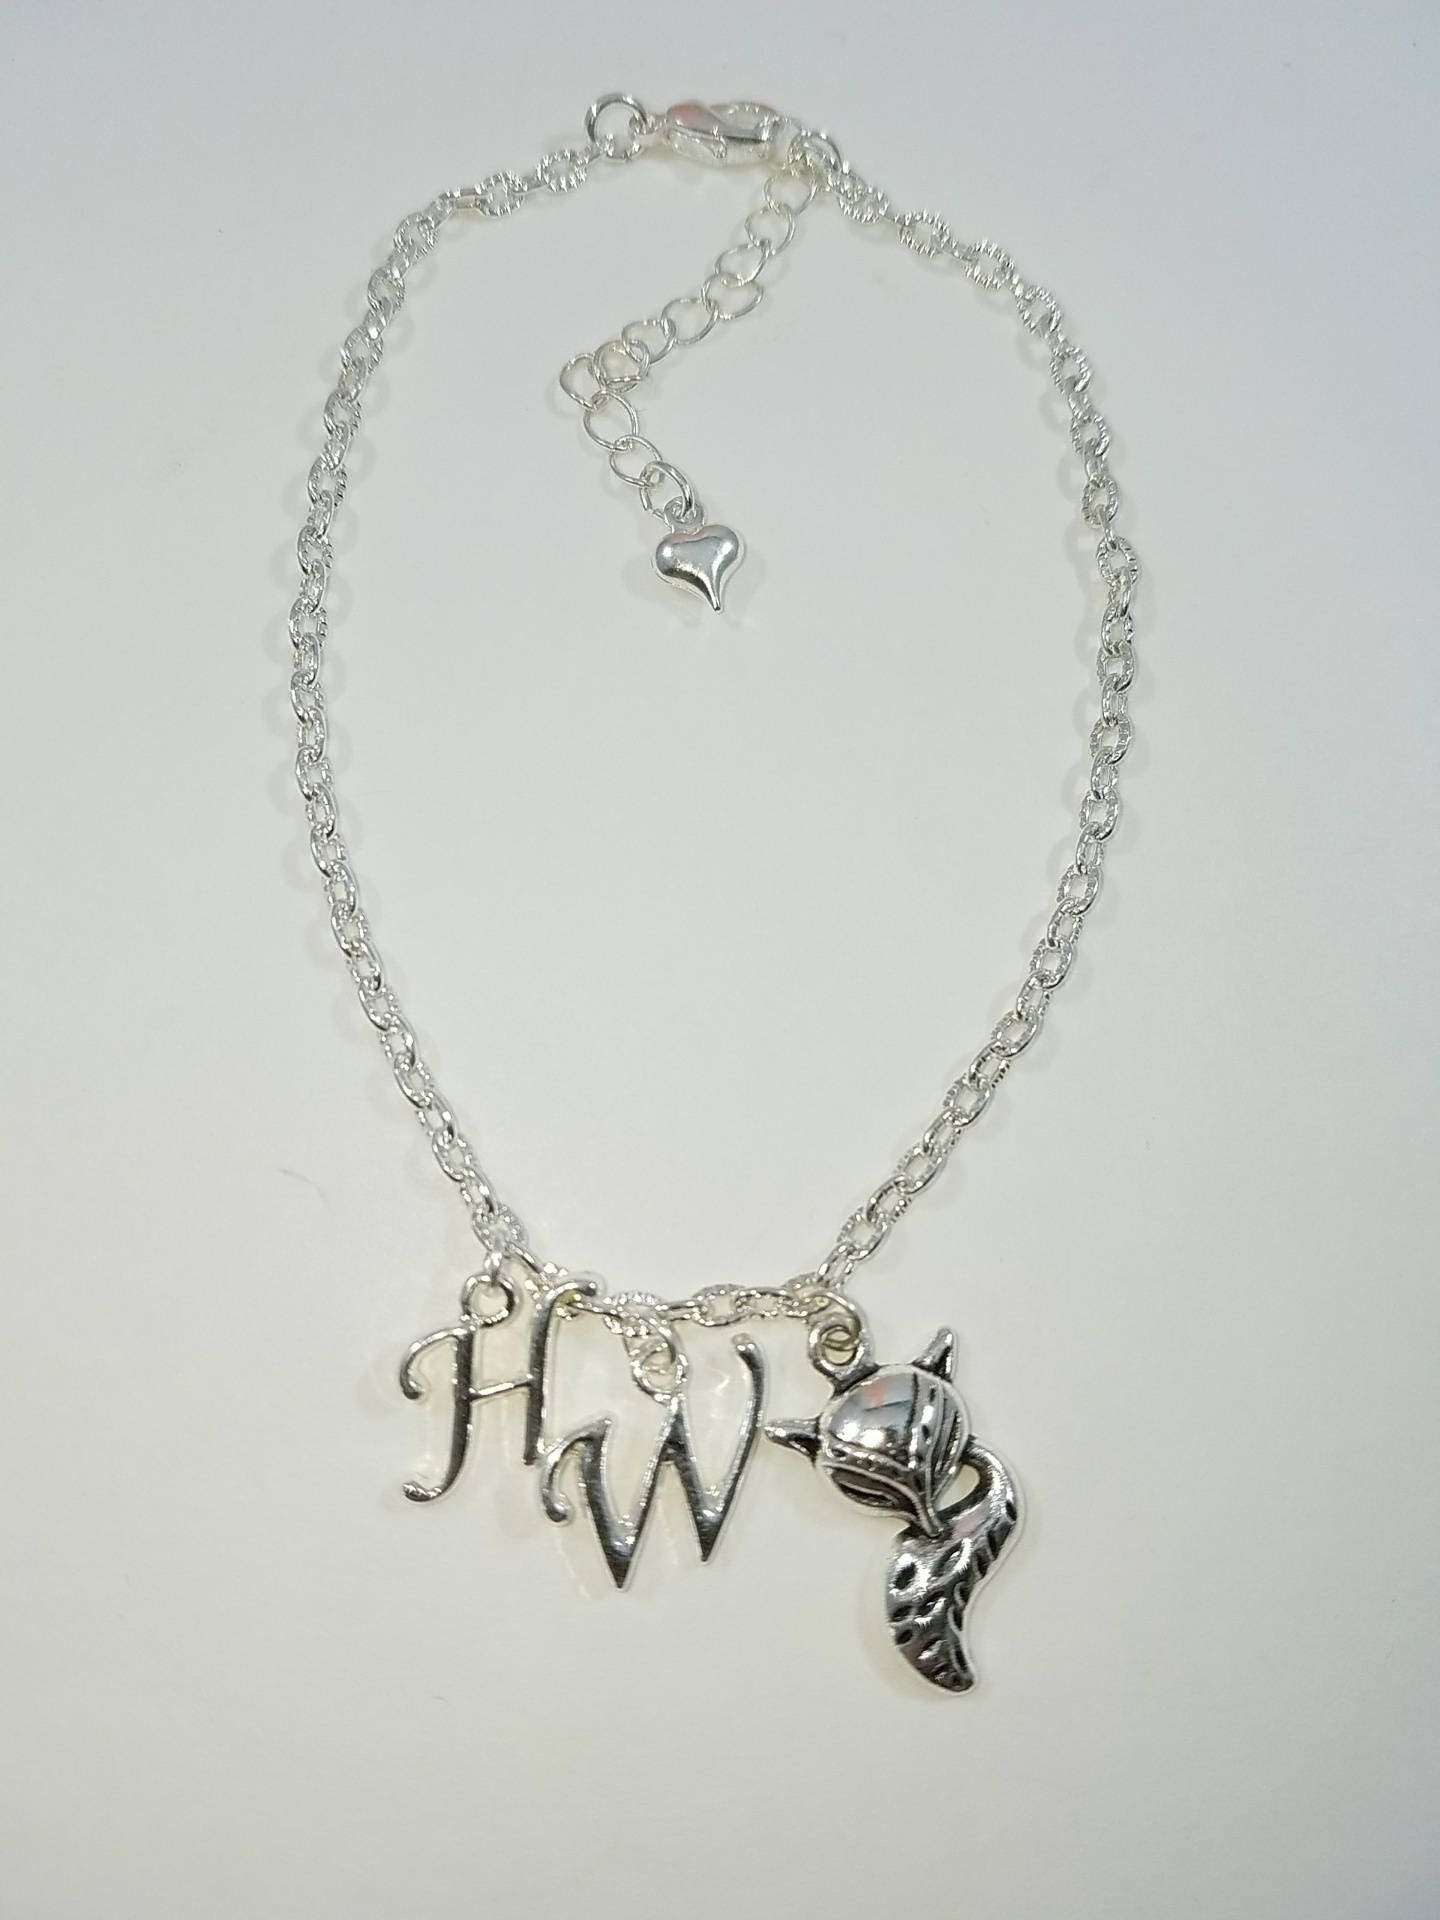 Vixen Hotwife Anklet, Sterling  Silver Chain, Initial Jewelry, Personalized Jewelry, Sexy Anklets, Swinger Jewelry